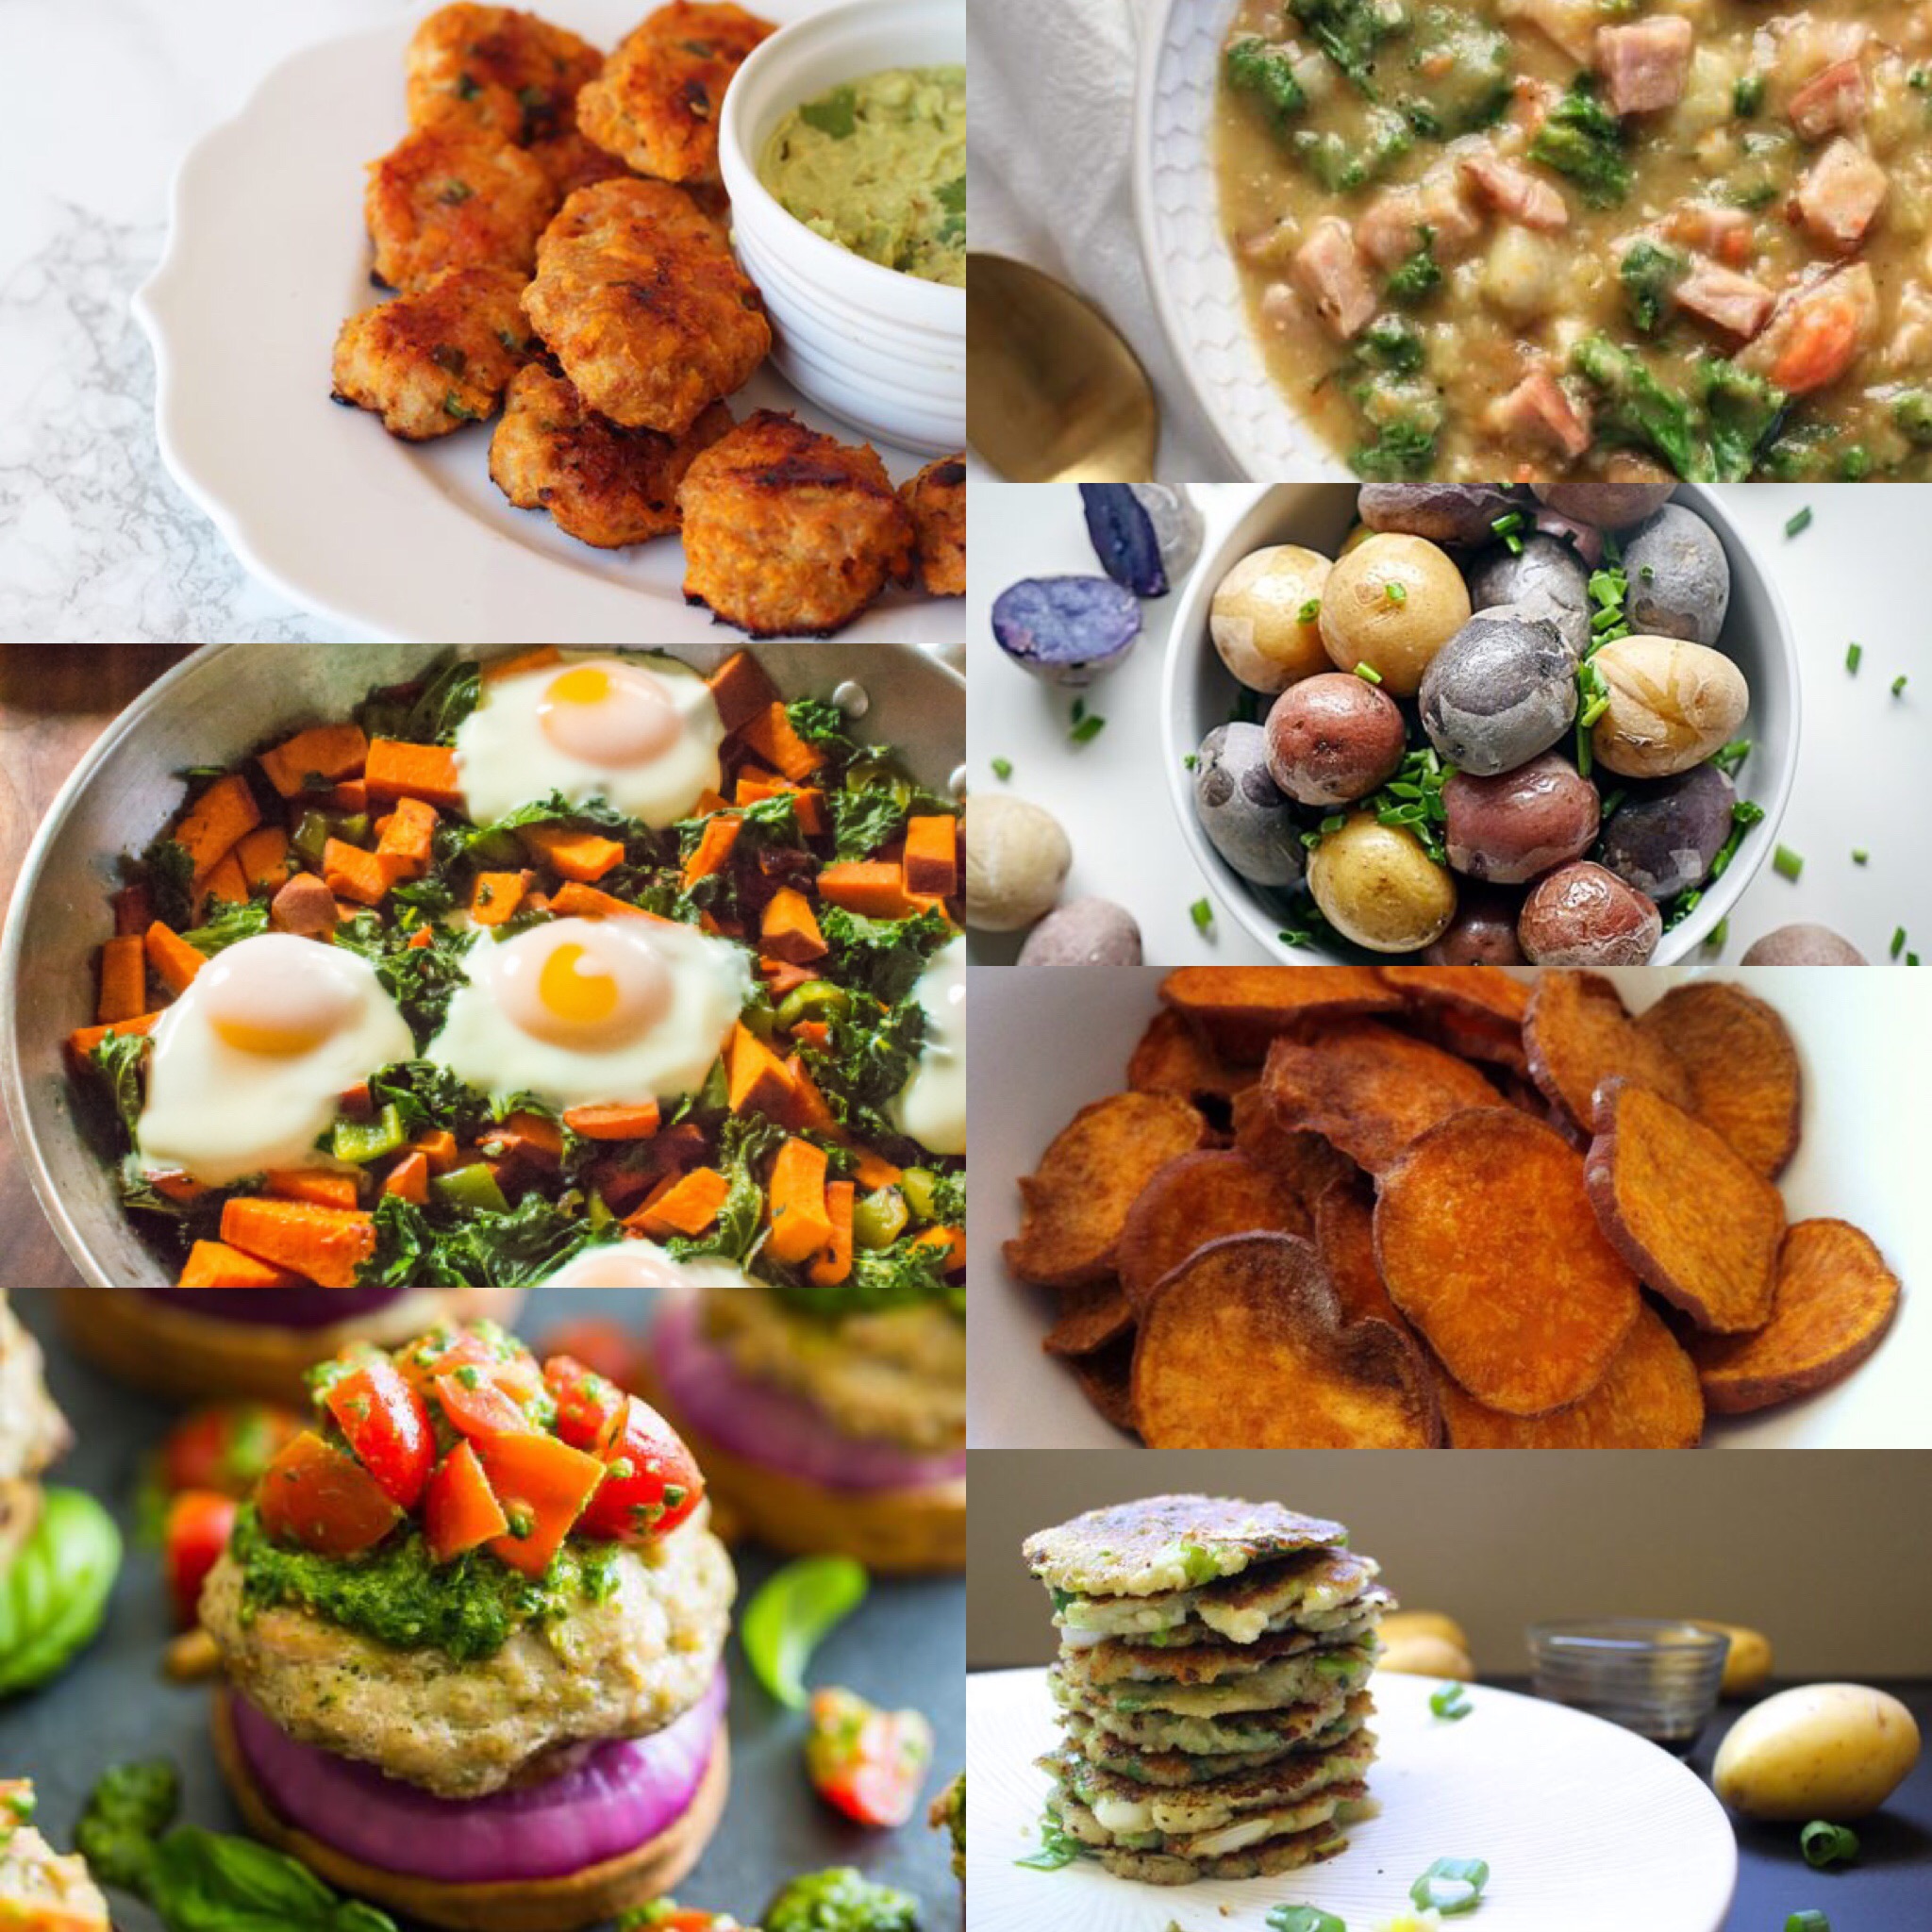 The Ultimate Paleo Potato Recipes Roundup! - Oh Snap! Let's Eat!